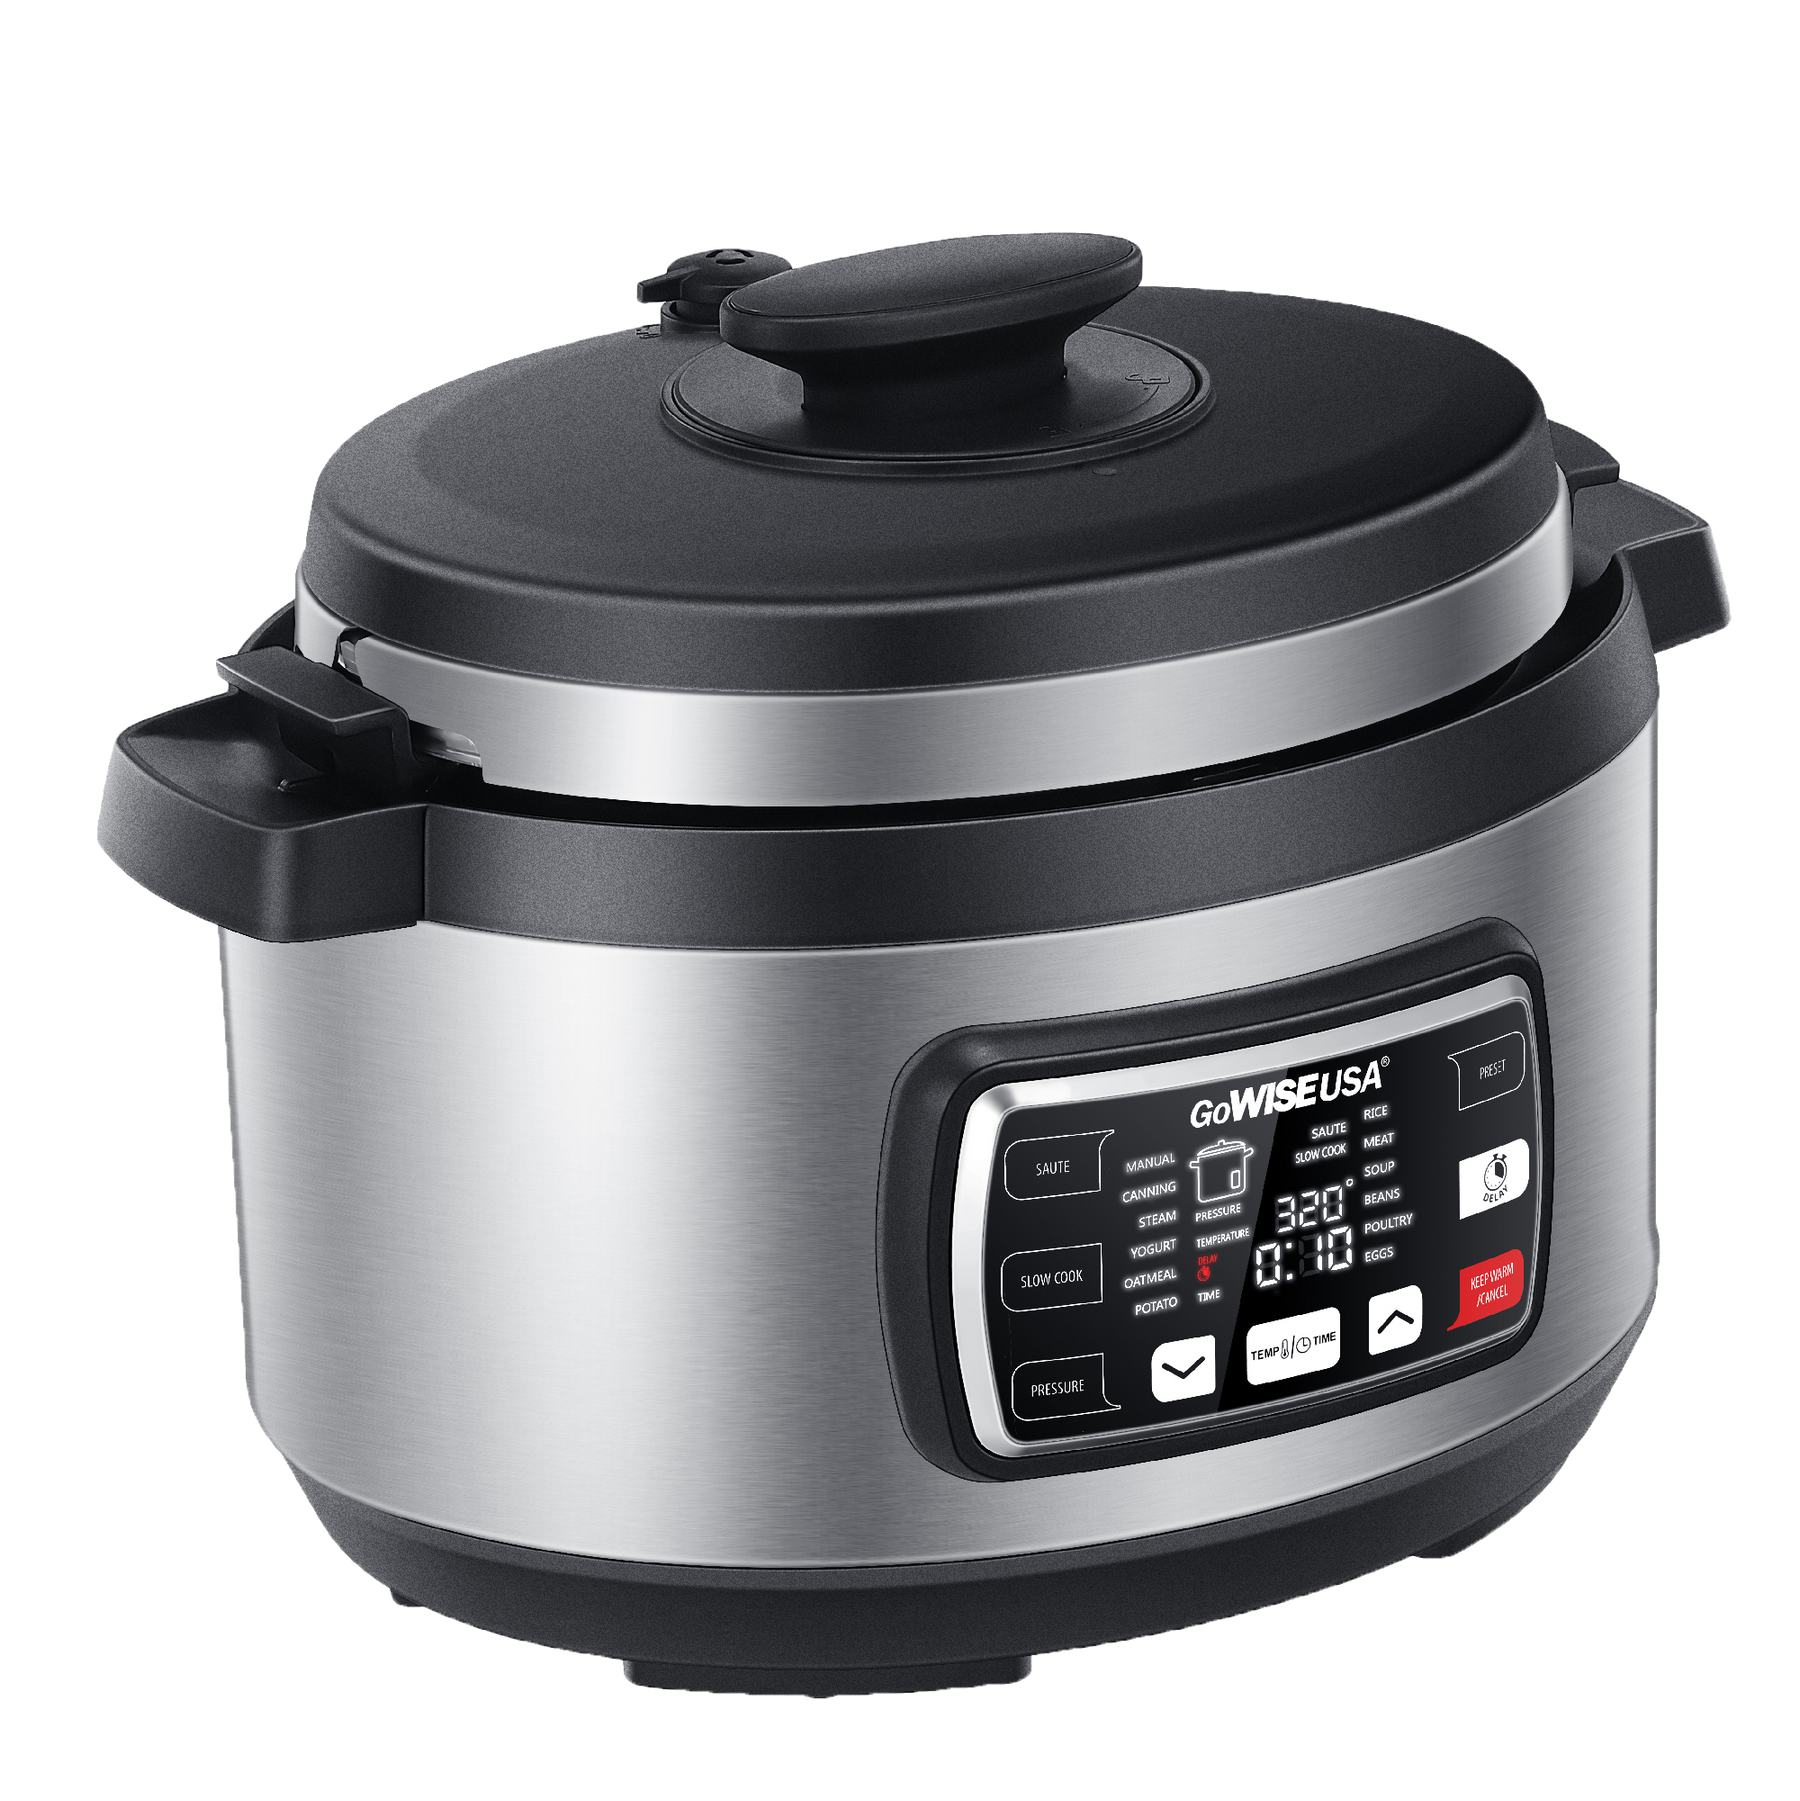 8.5 Quart Ovate Series Pressure Cooker with Accessories